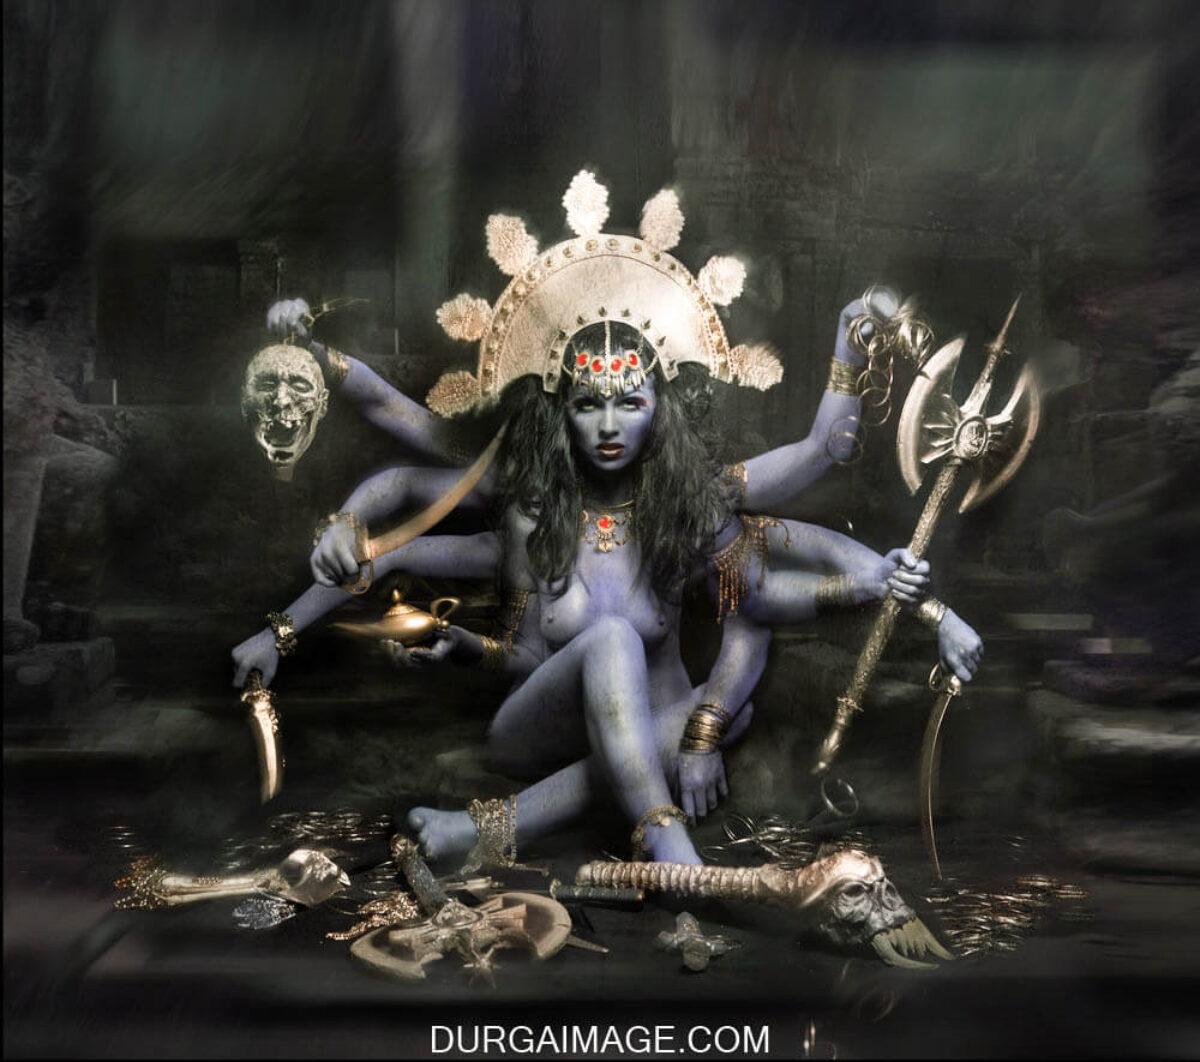 10 + Maa Kali Image Free Download - For WhatsApp & Instagram